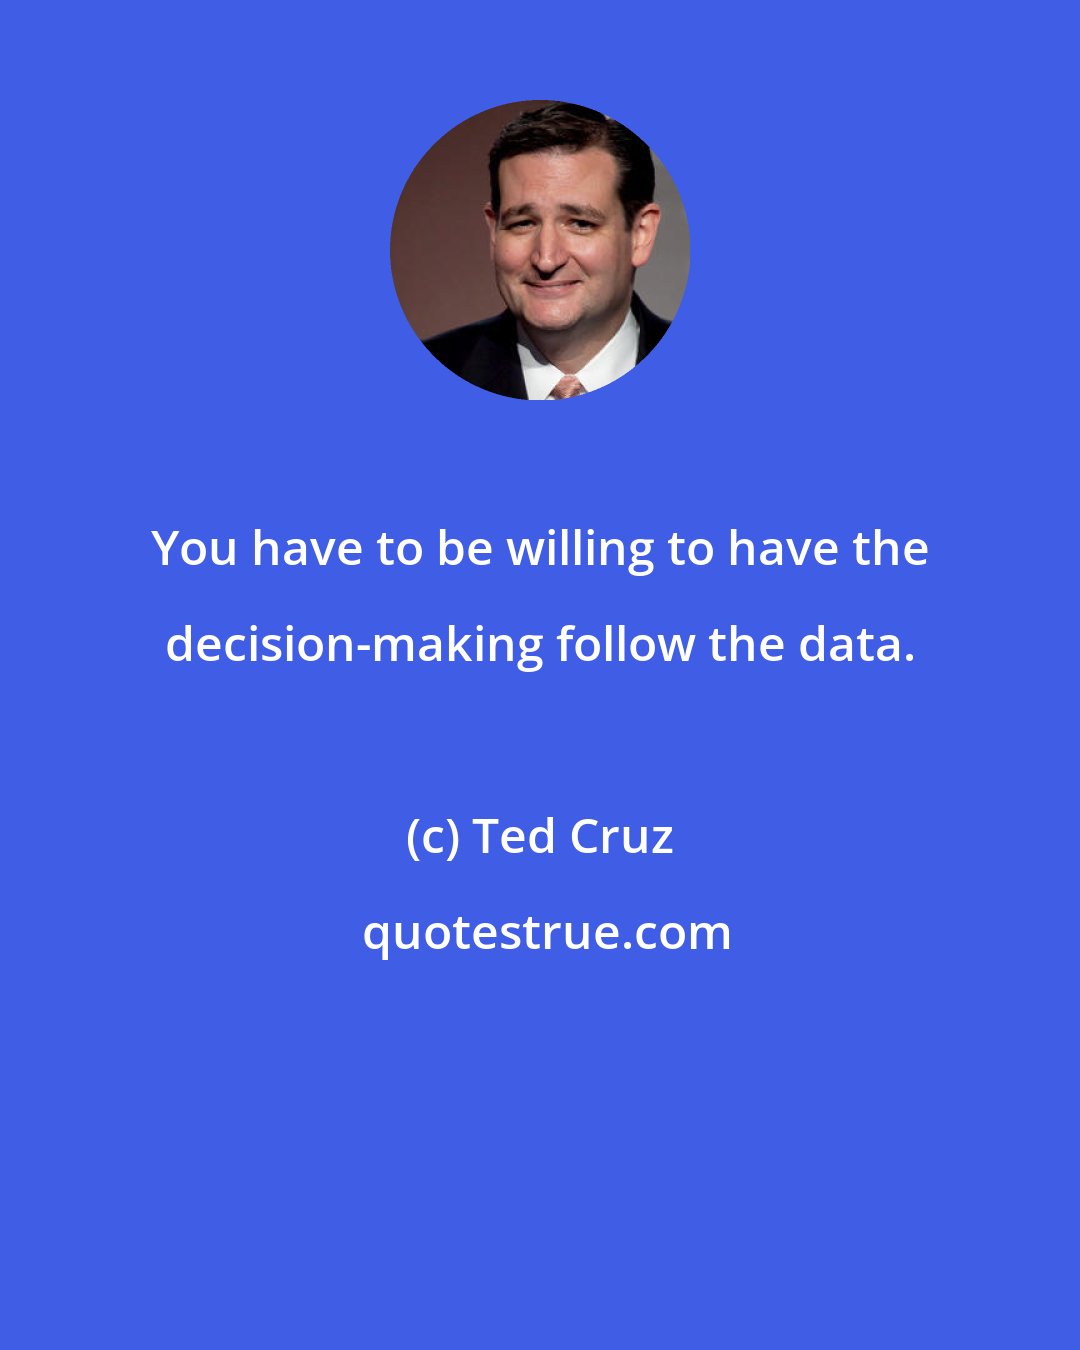 Ted Cruz: You have to be willing to have the decision-making follow the data.